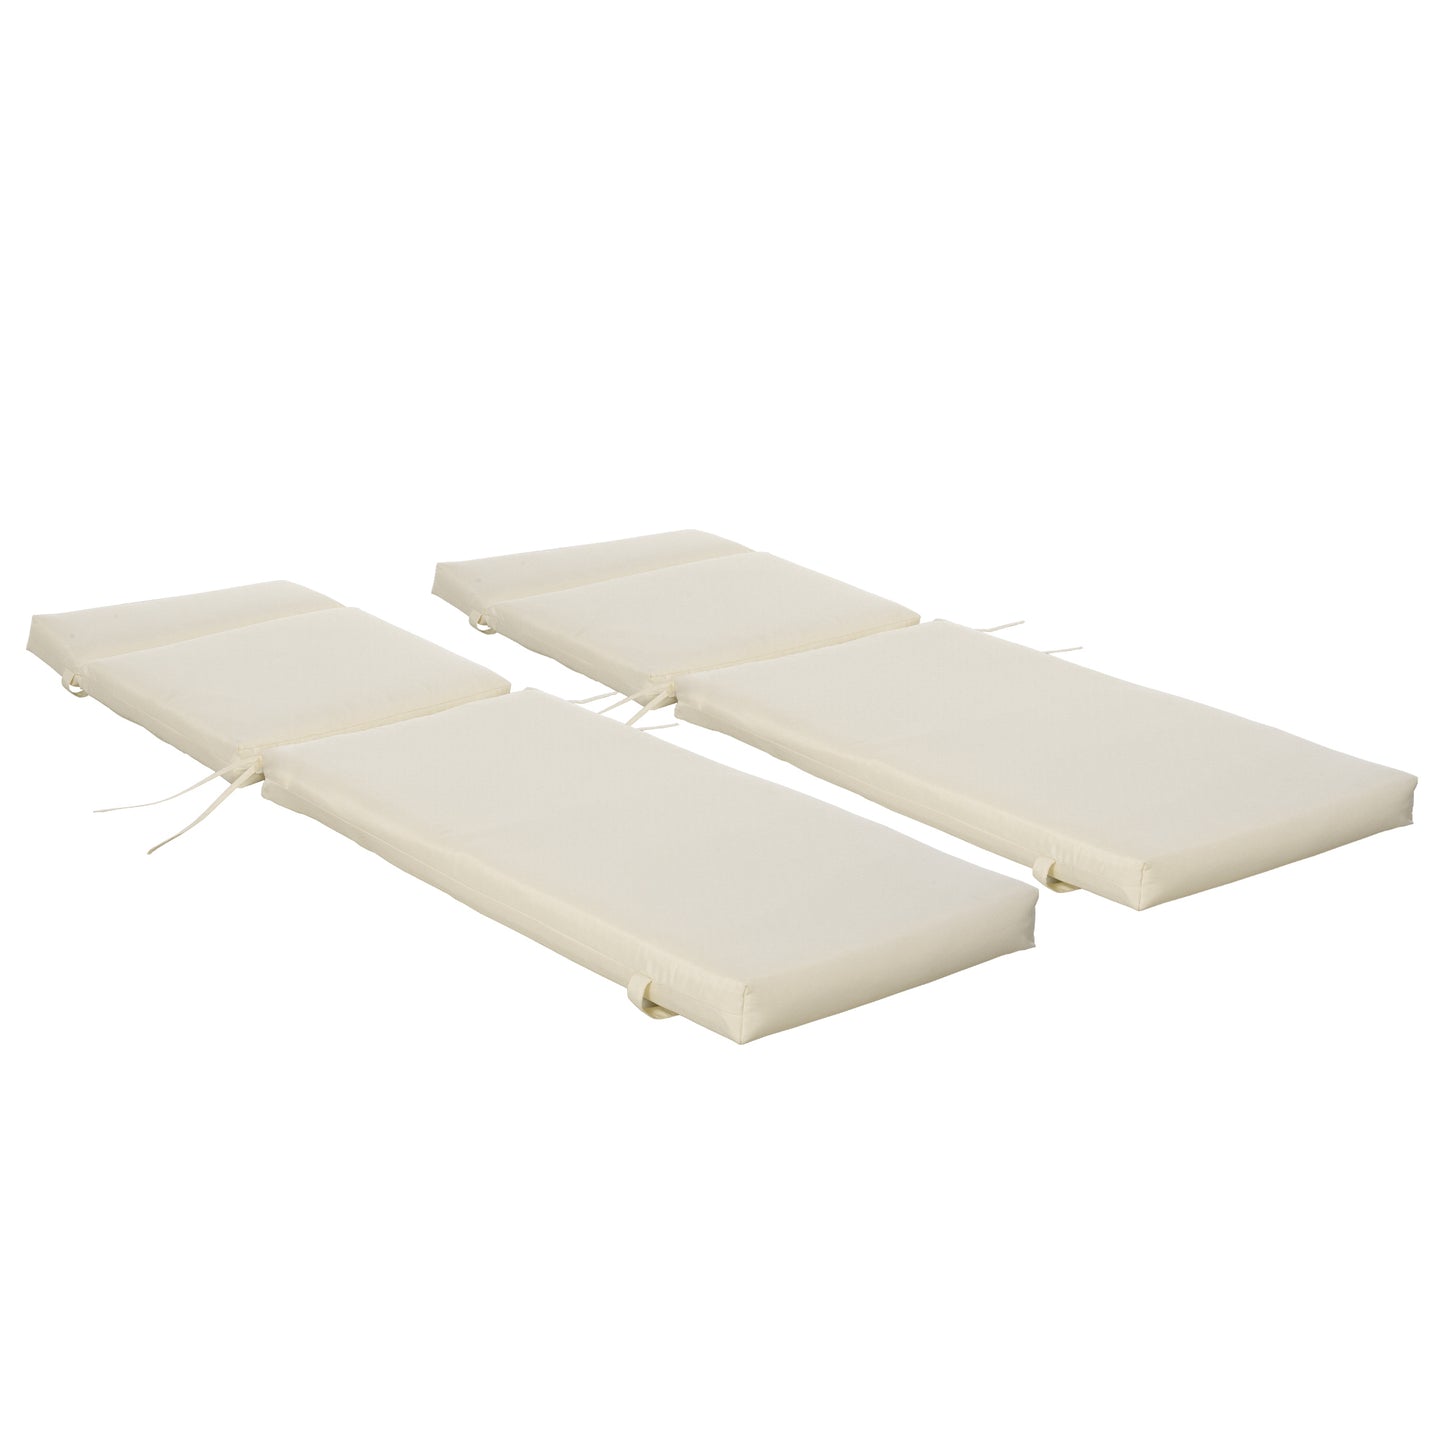 Outsunny Set of 2 Sun Lounger Cushion Non-Slip Seat Pads for Indoor Outdoor Cream White